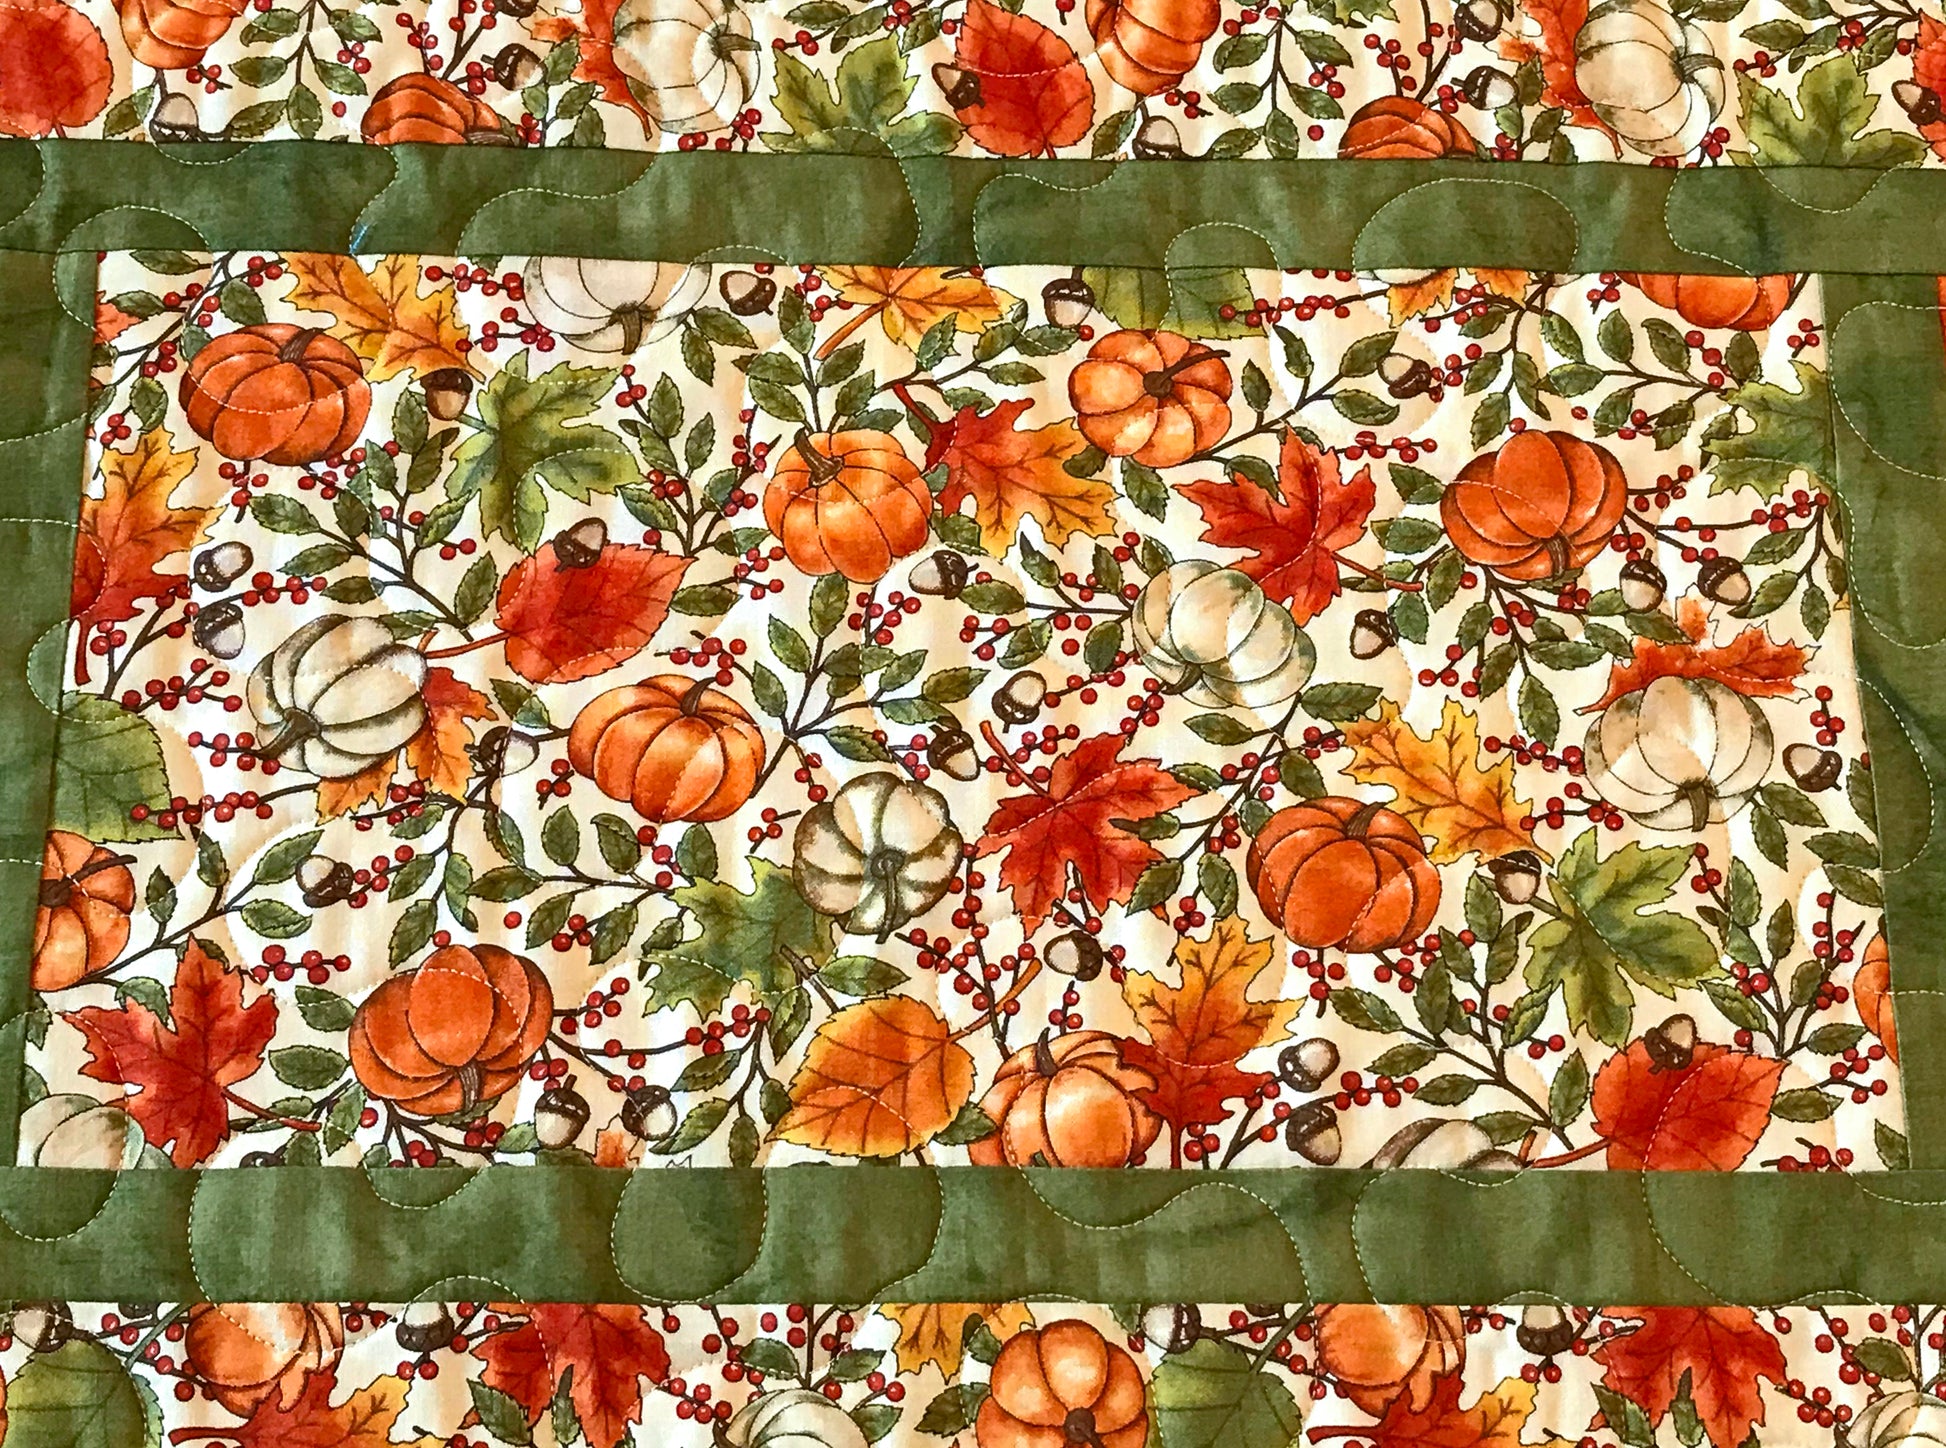 Fall Pumpkins Table Runner - Handmade Quilts, Digital Patterns, and Home Décor items online - Cuddle Cat Quiltworks